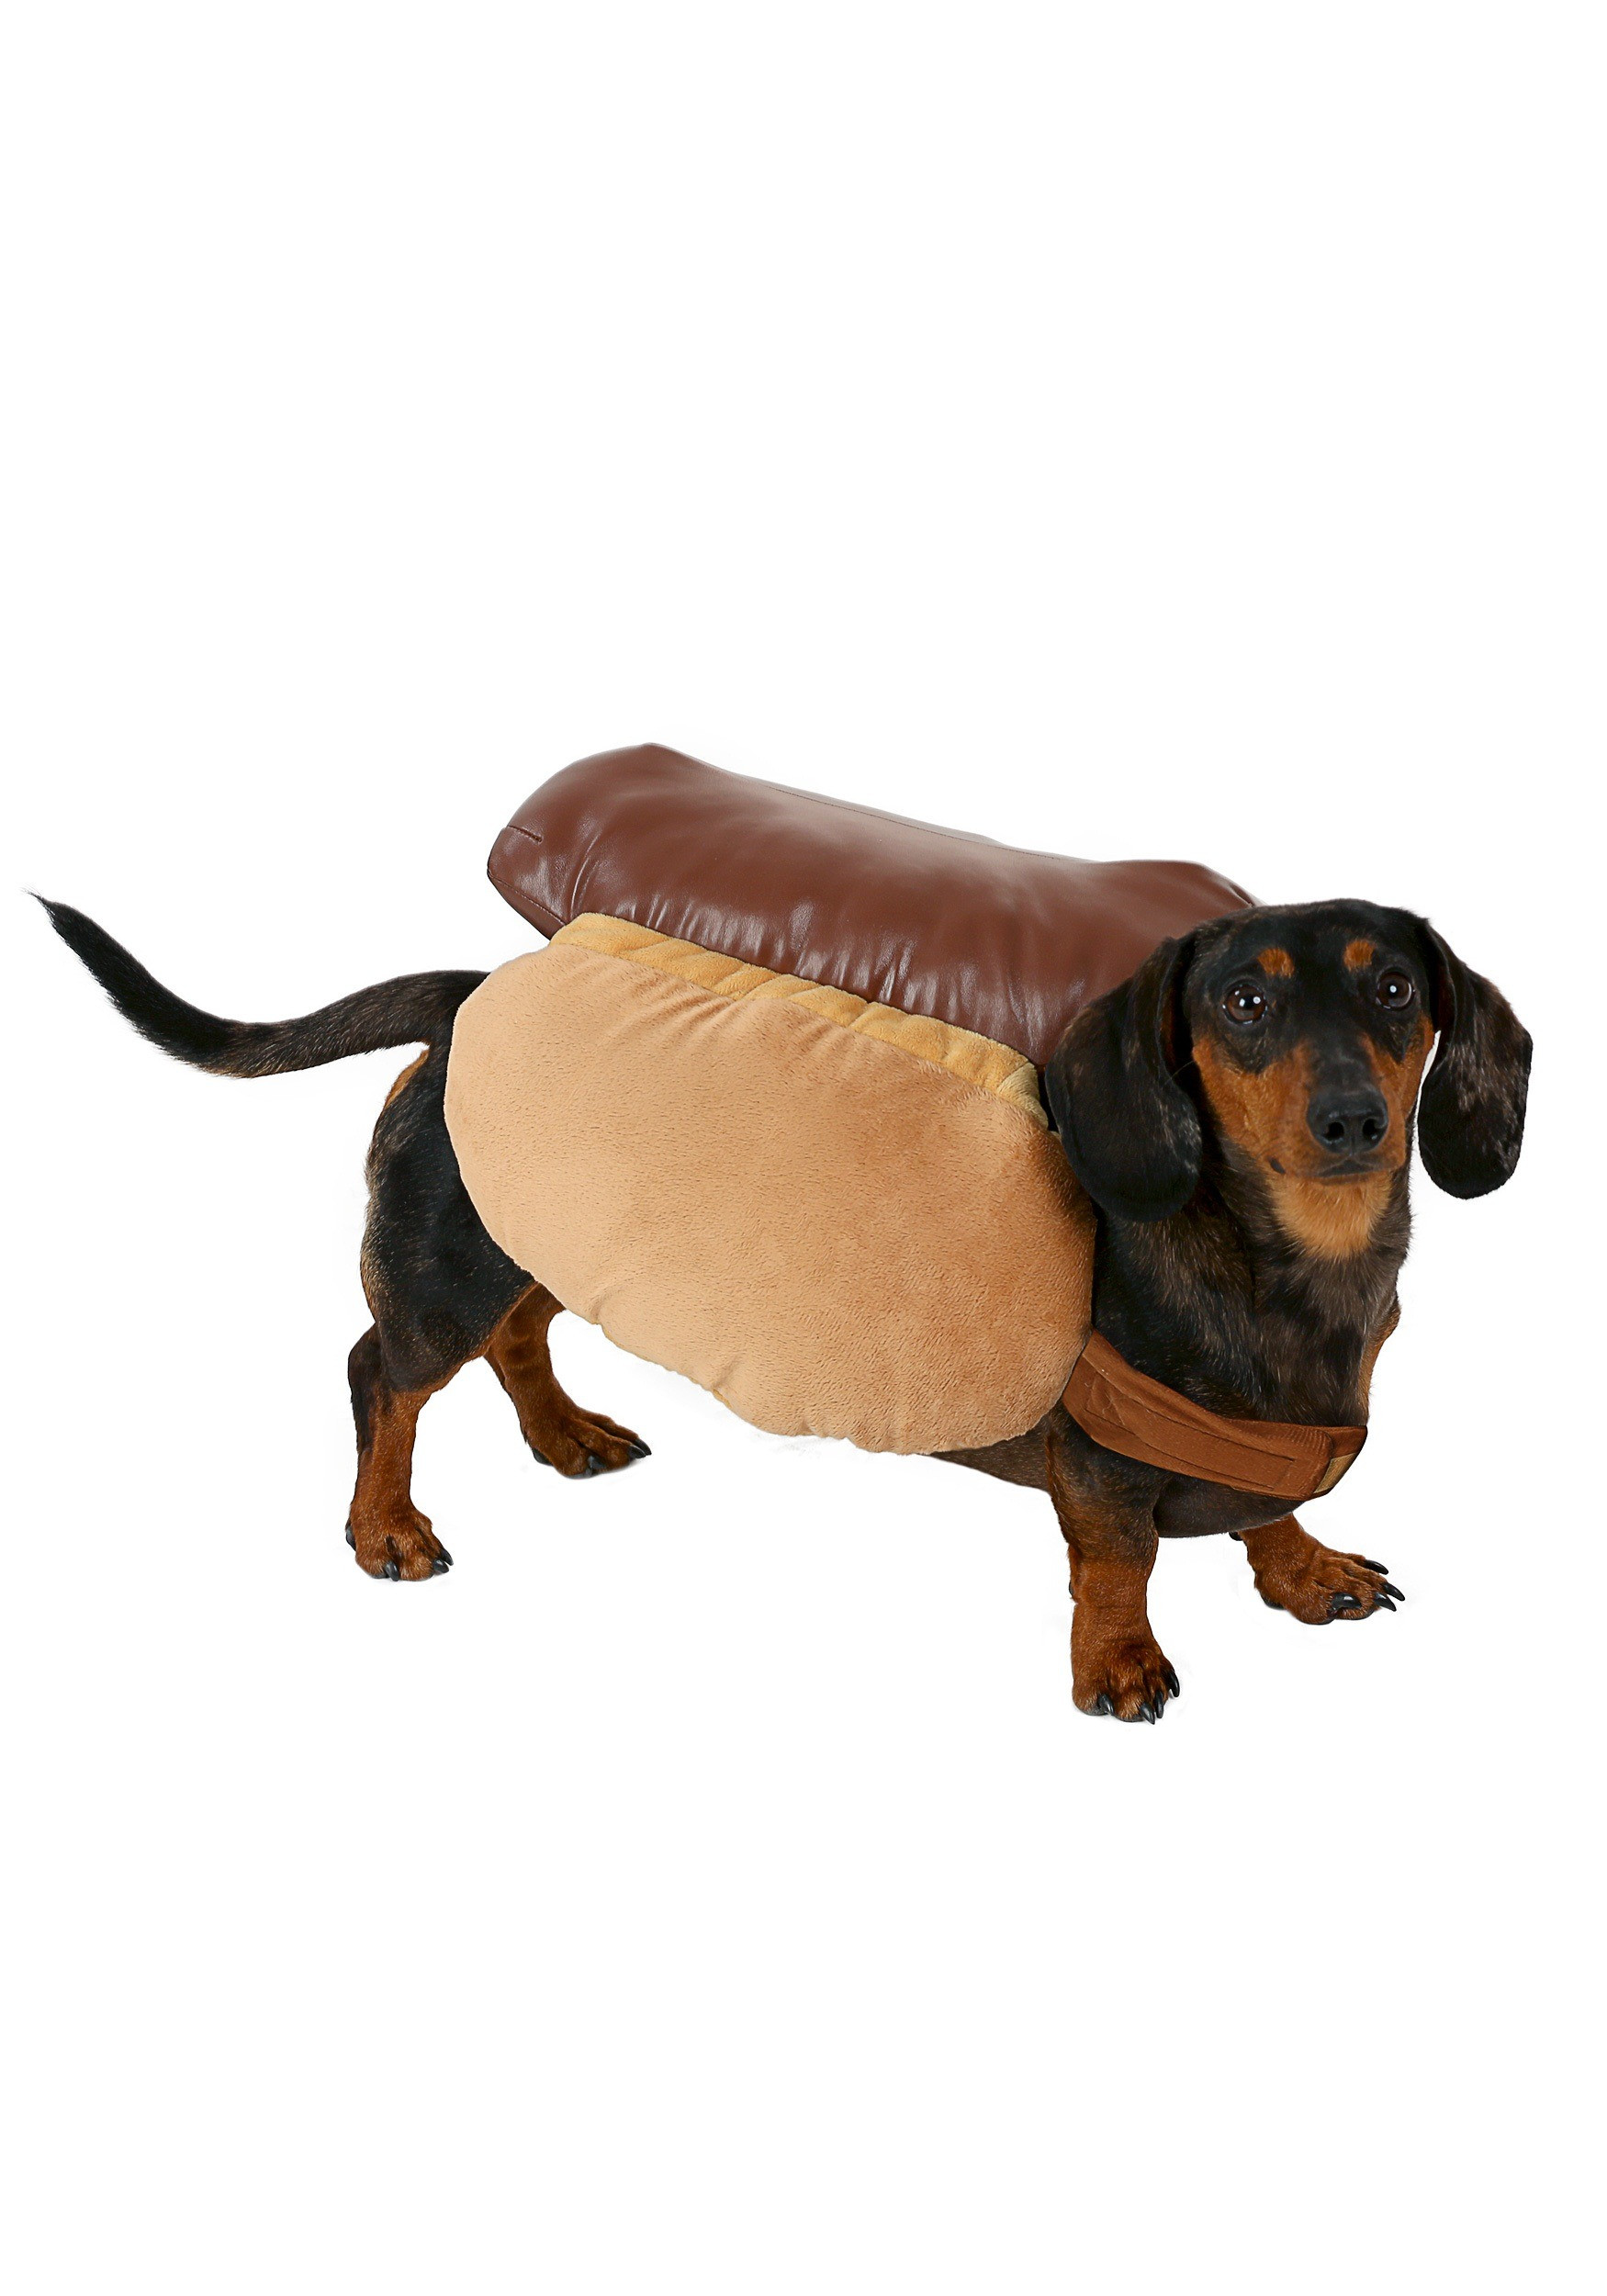 Hot Dog Halloween Costume For Dogs
 Hot Dog Costume for Dogs